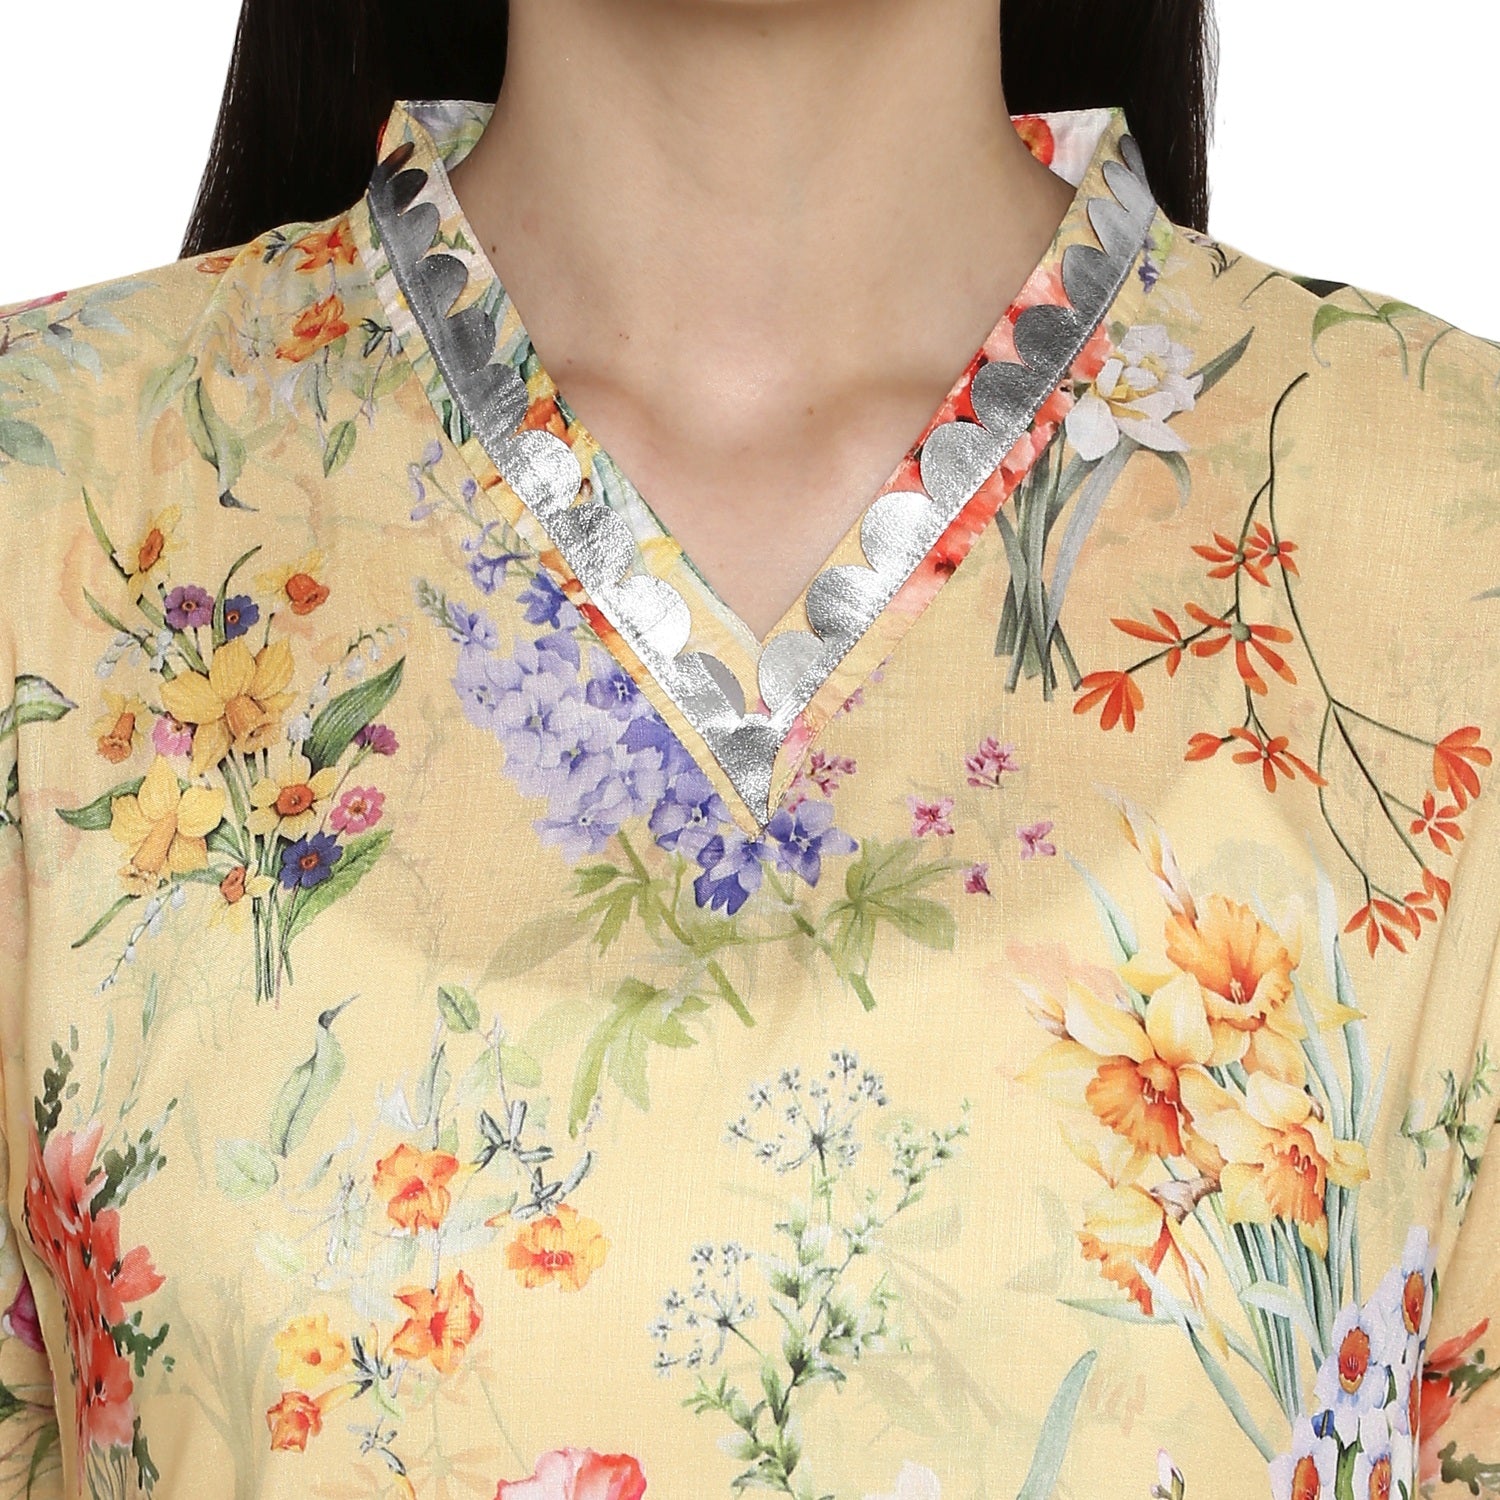 Women's Yellow Floral Straight Only Kurta With Silver Scallop Lace Detail - Ahalyaa